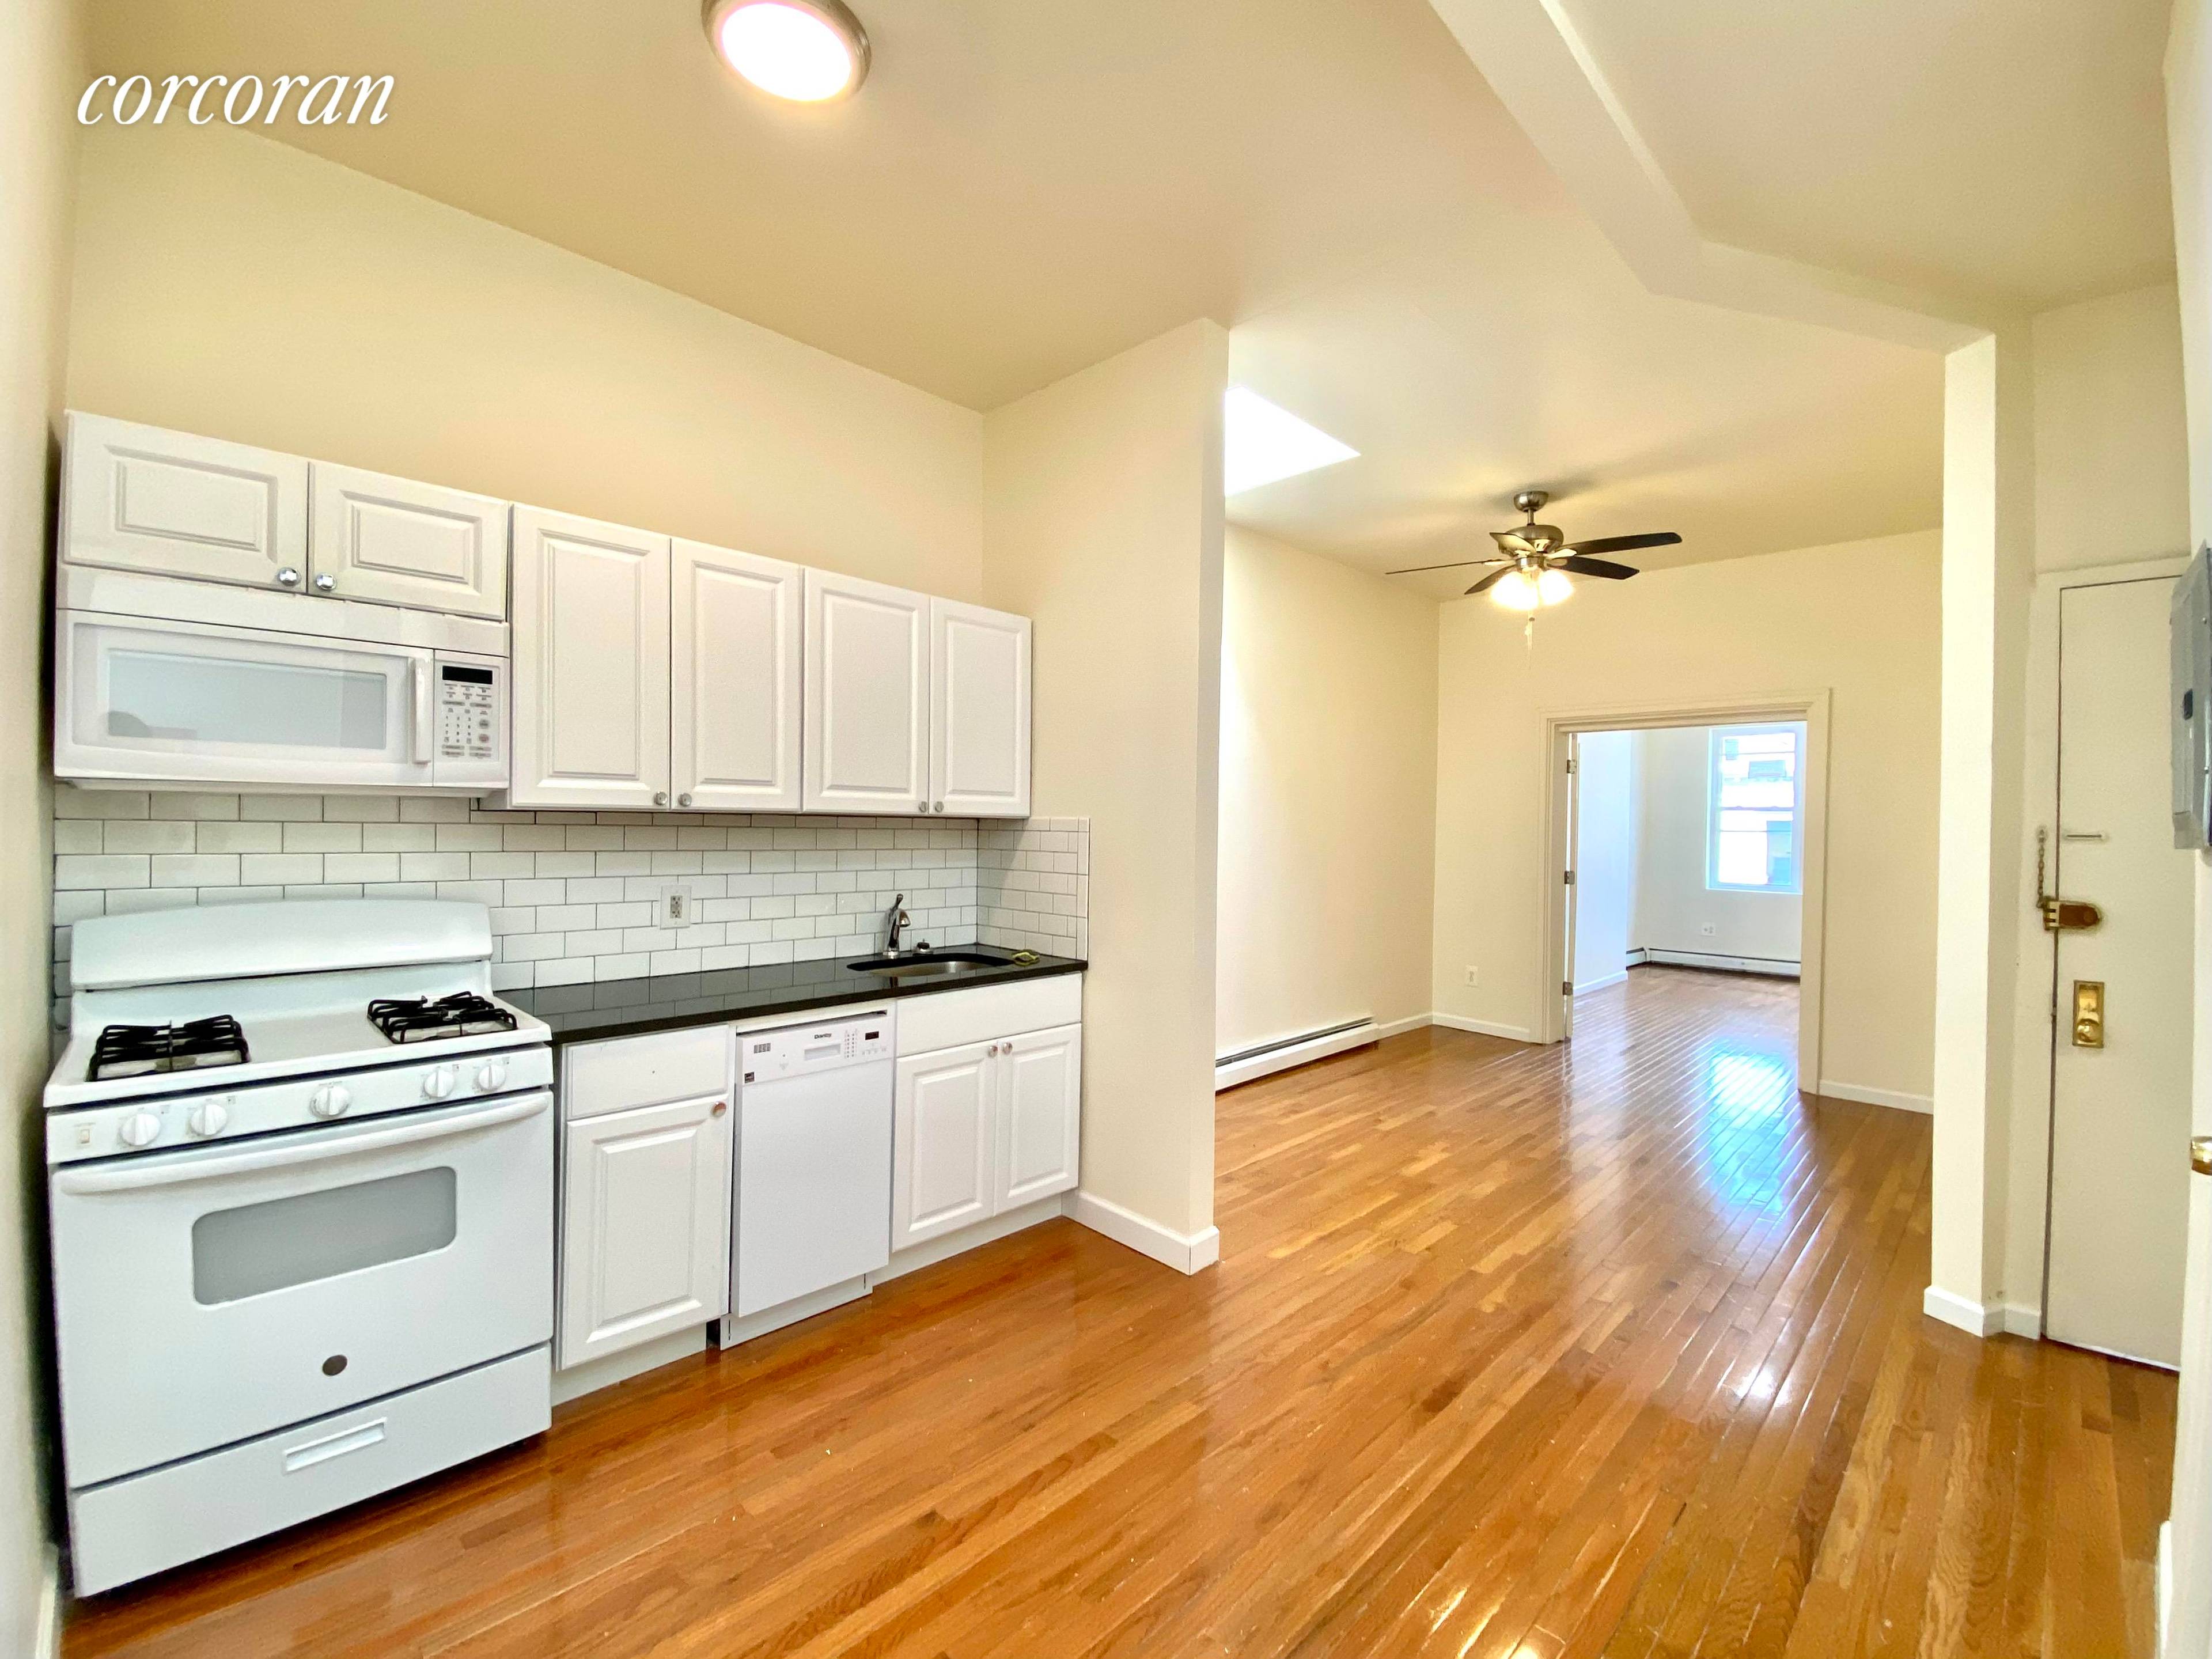 Beautiful Newly Renovated 3 bedrooms 6 rooms apartment featuring hardwood floors, kitchen with new appliances, microwave, dishwasher, high ceilings, lots of natural listings, skylight.